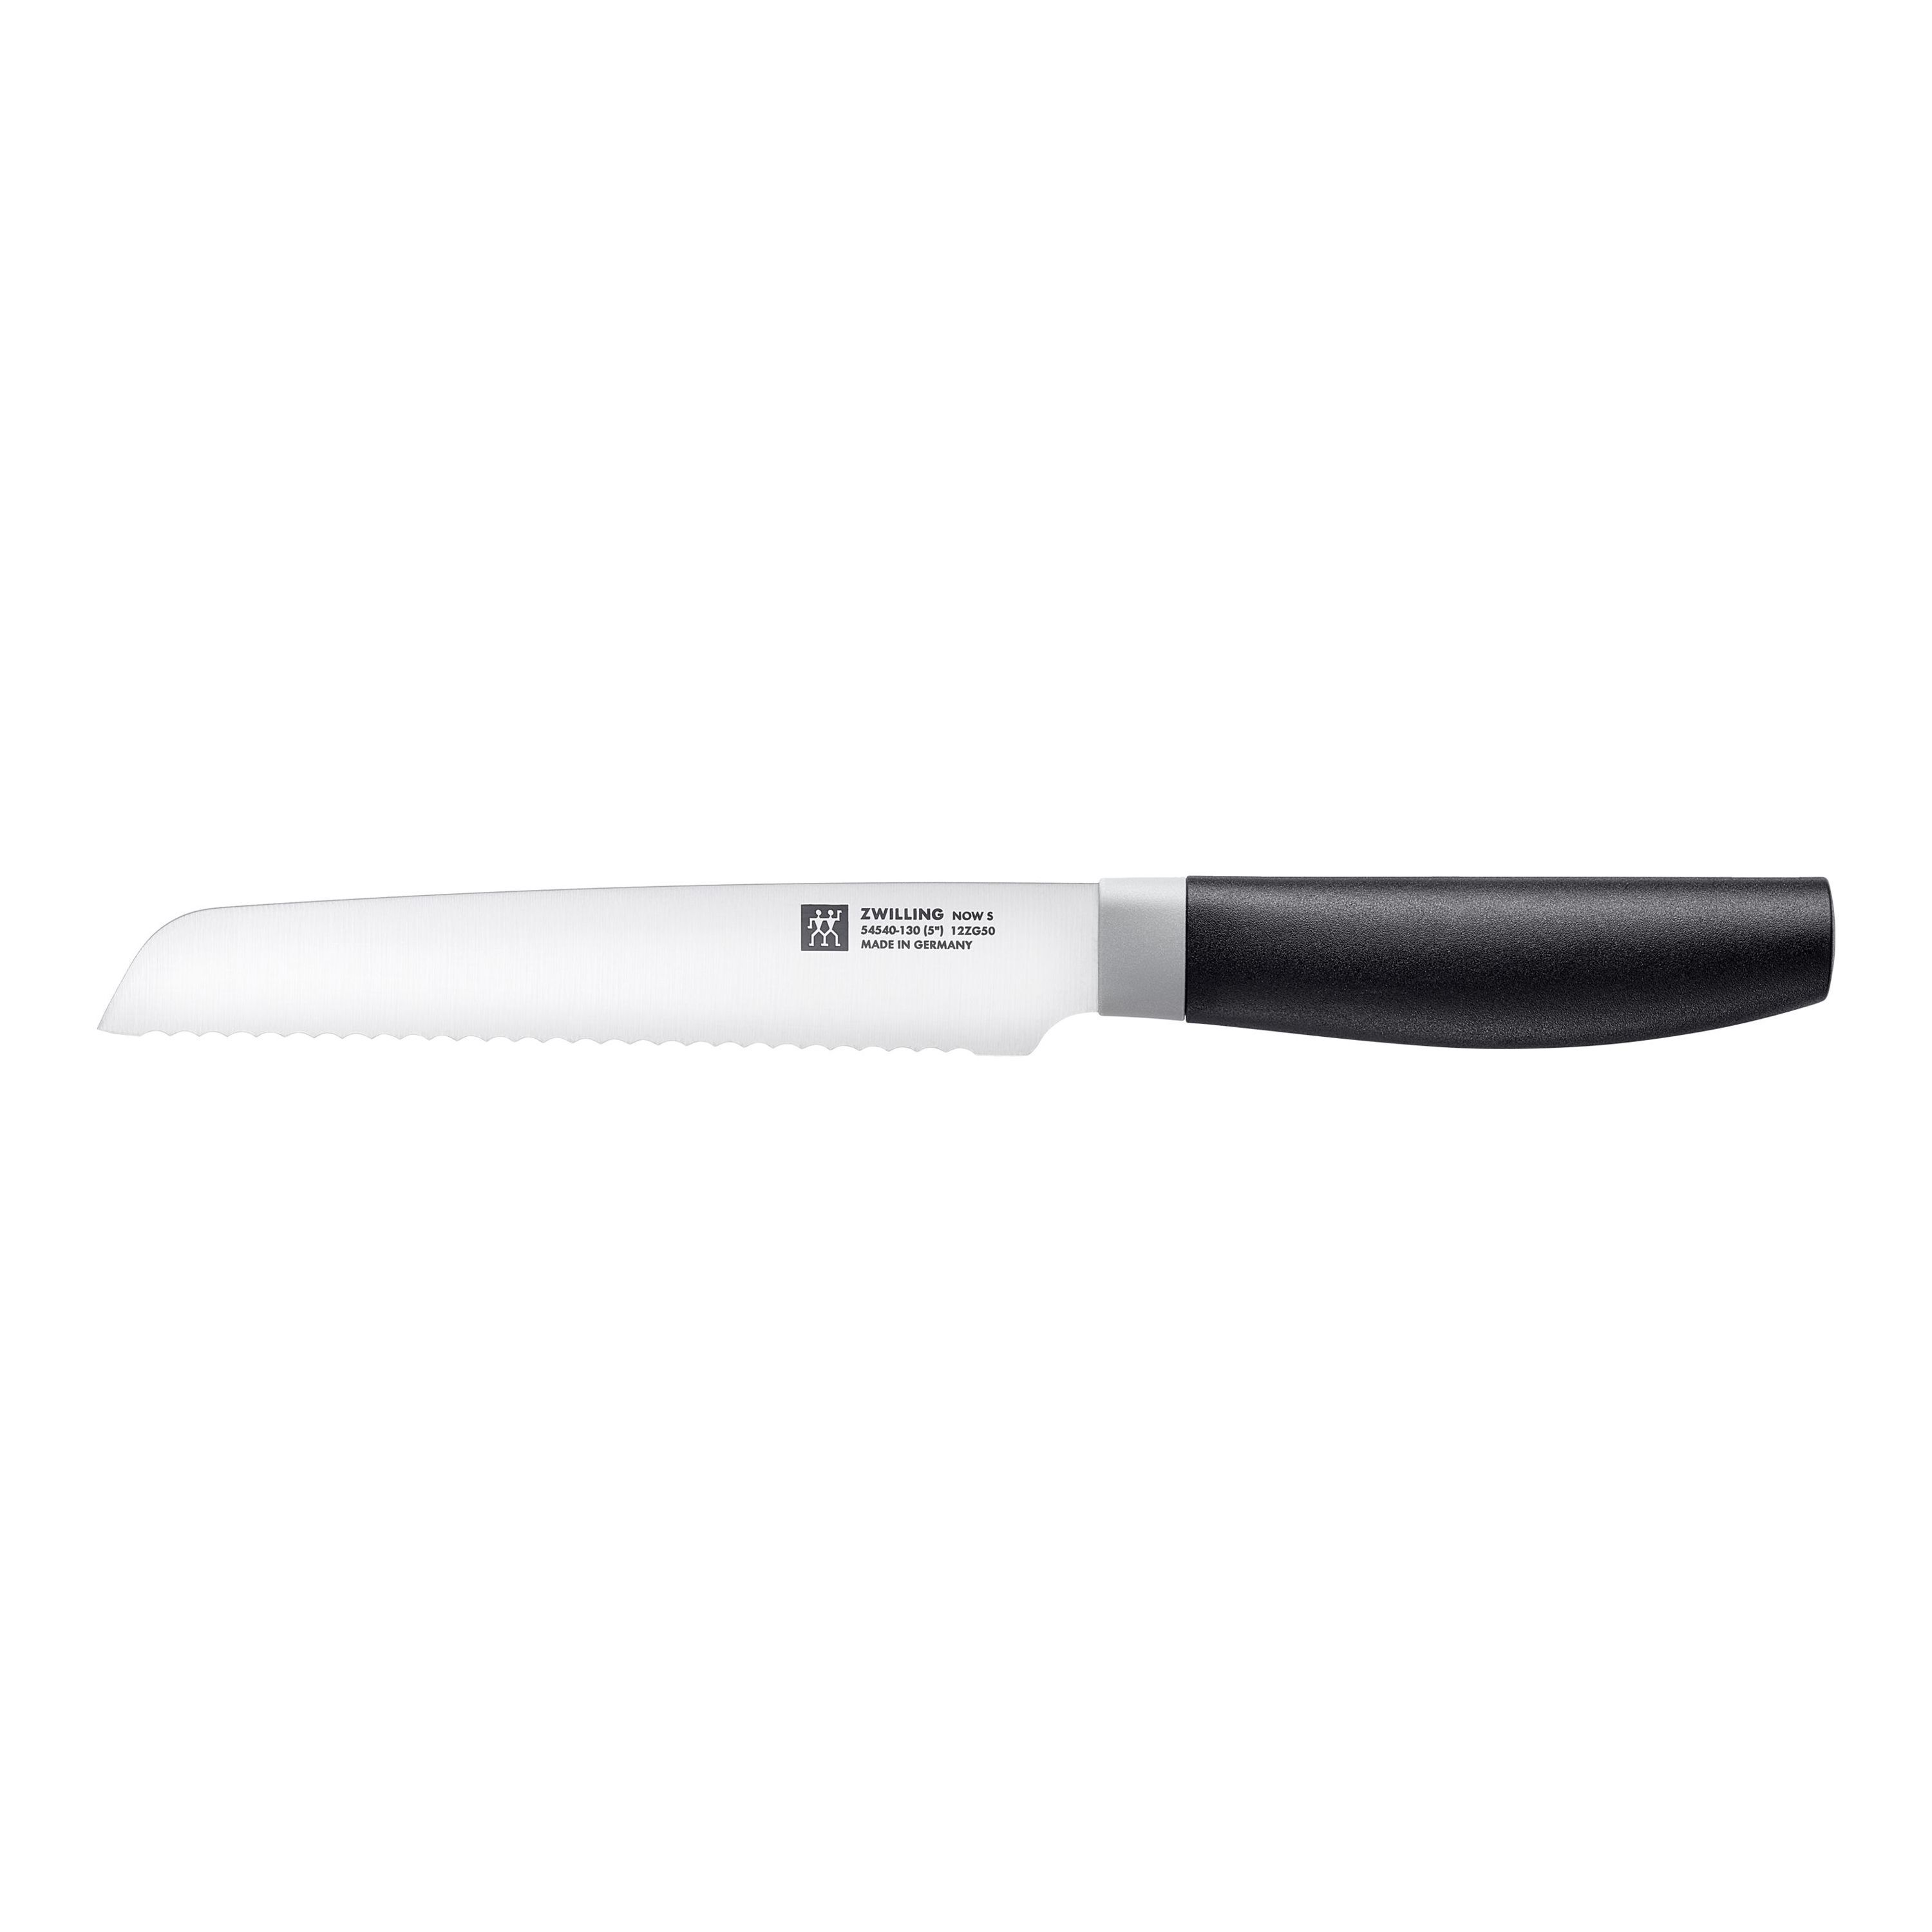 ZWILLING Universeel mes, 13 cm - Now S - 